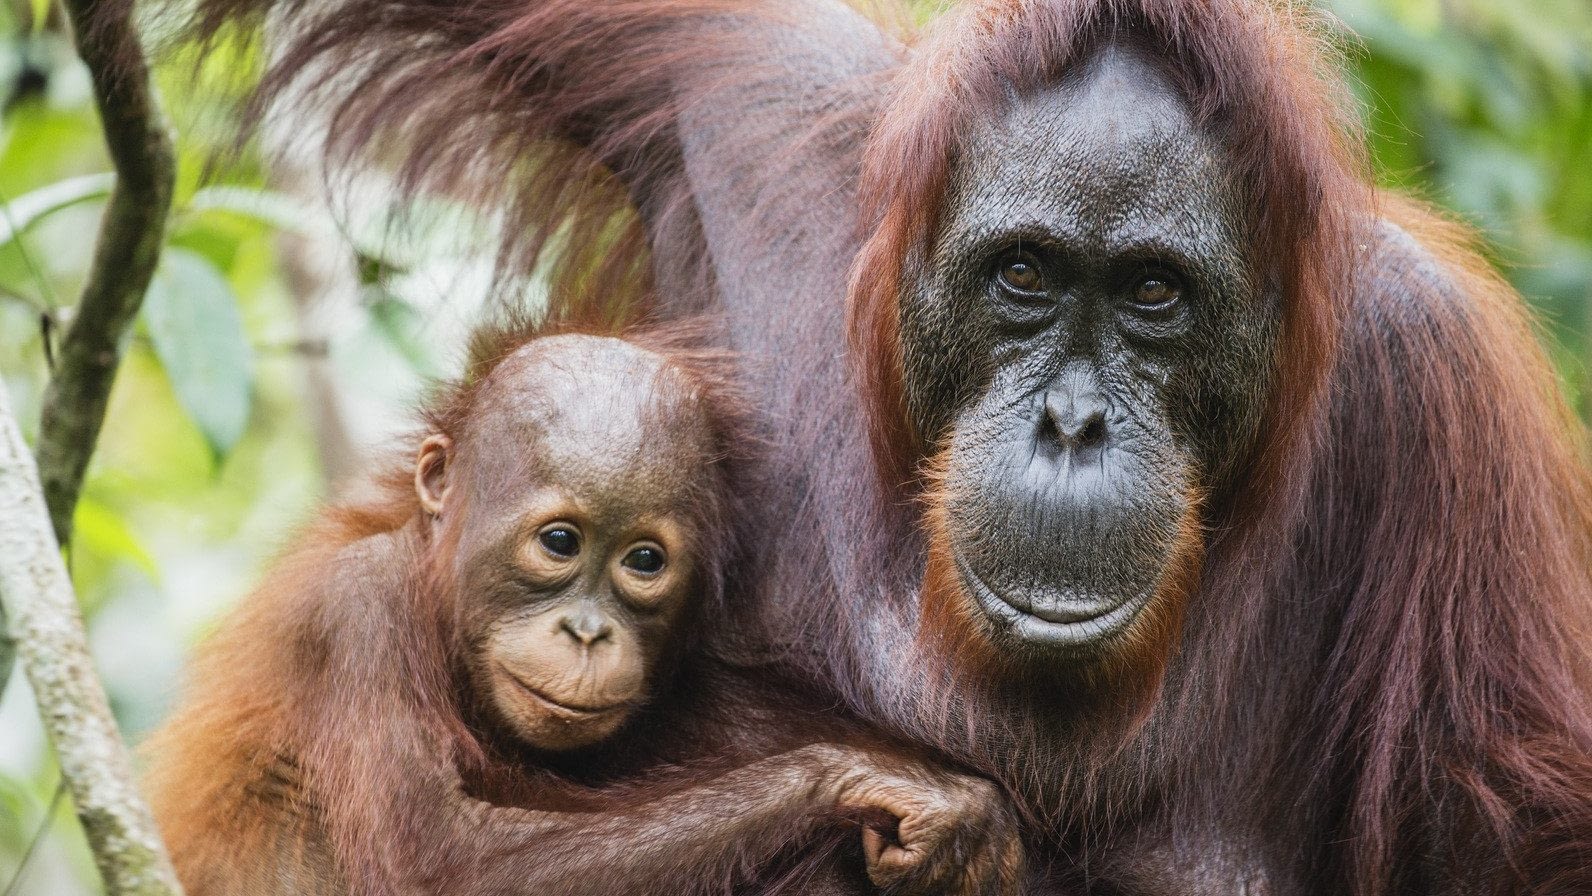 Image: A close-up portrait of a female orangutan (Pongo pymaeus) and her young together, Tanjung Puting National Park, Central Kalimantan, Borneo, Indonesia